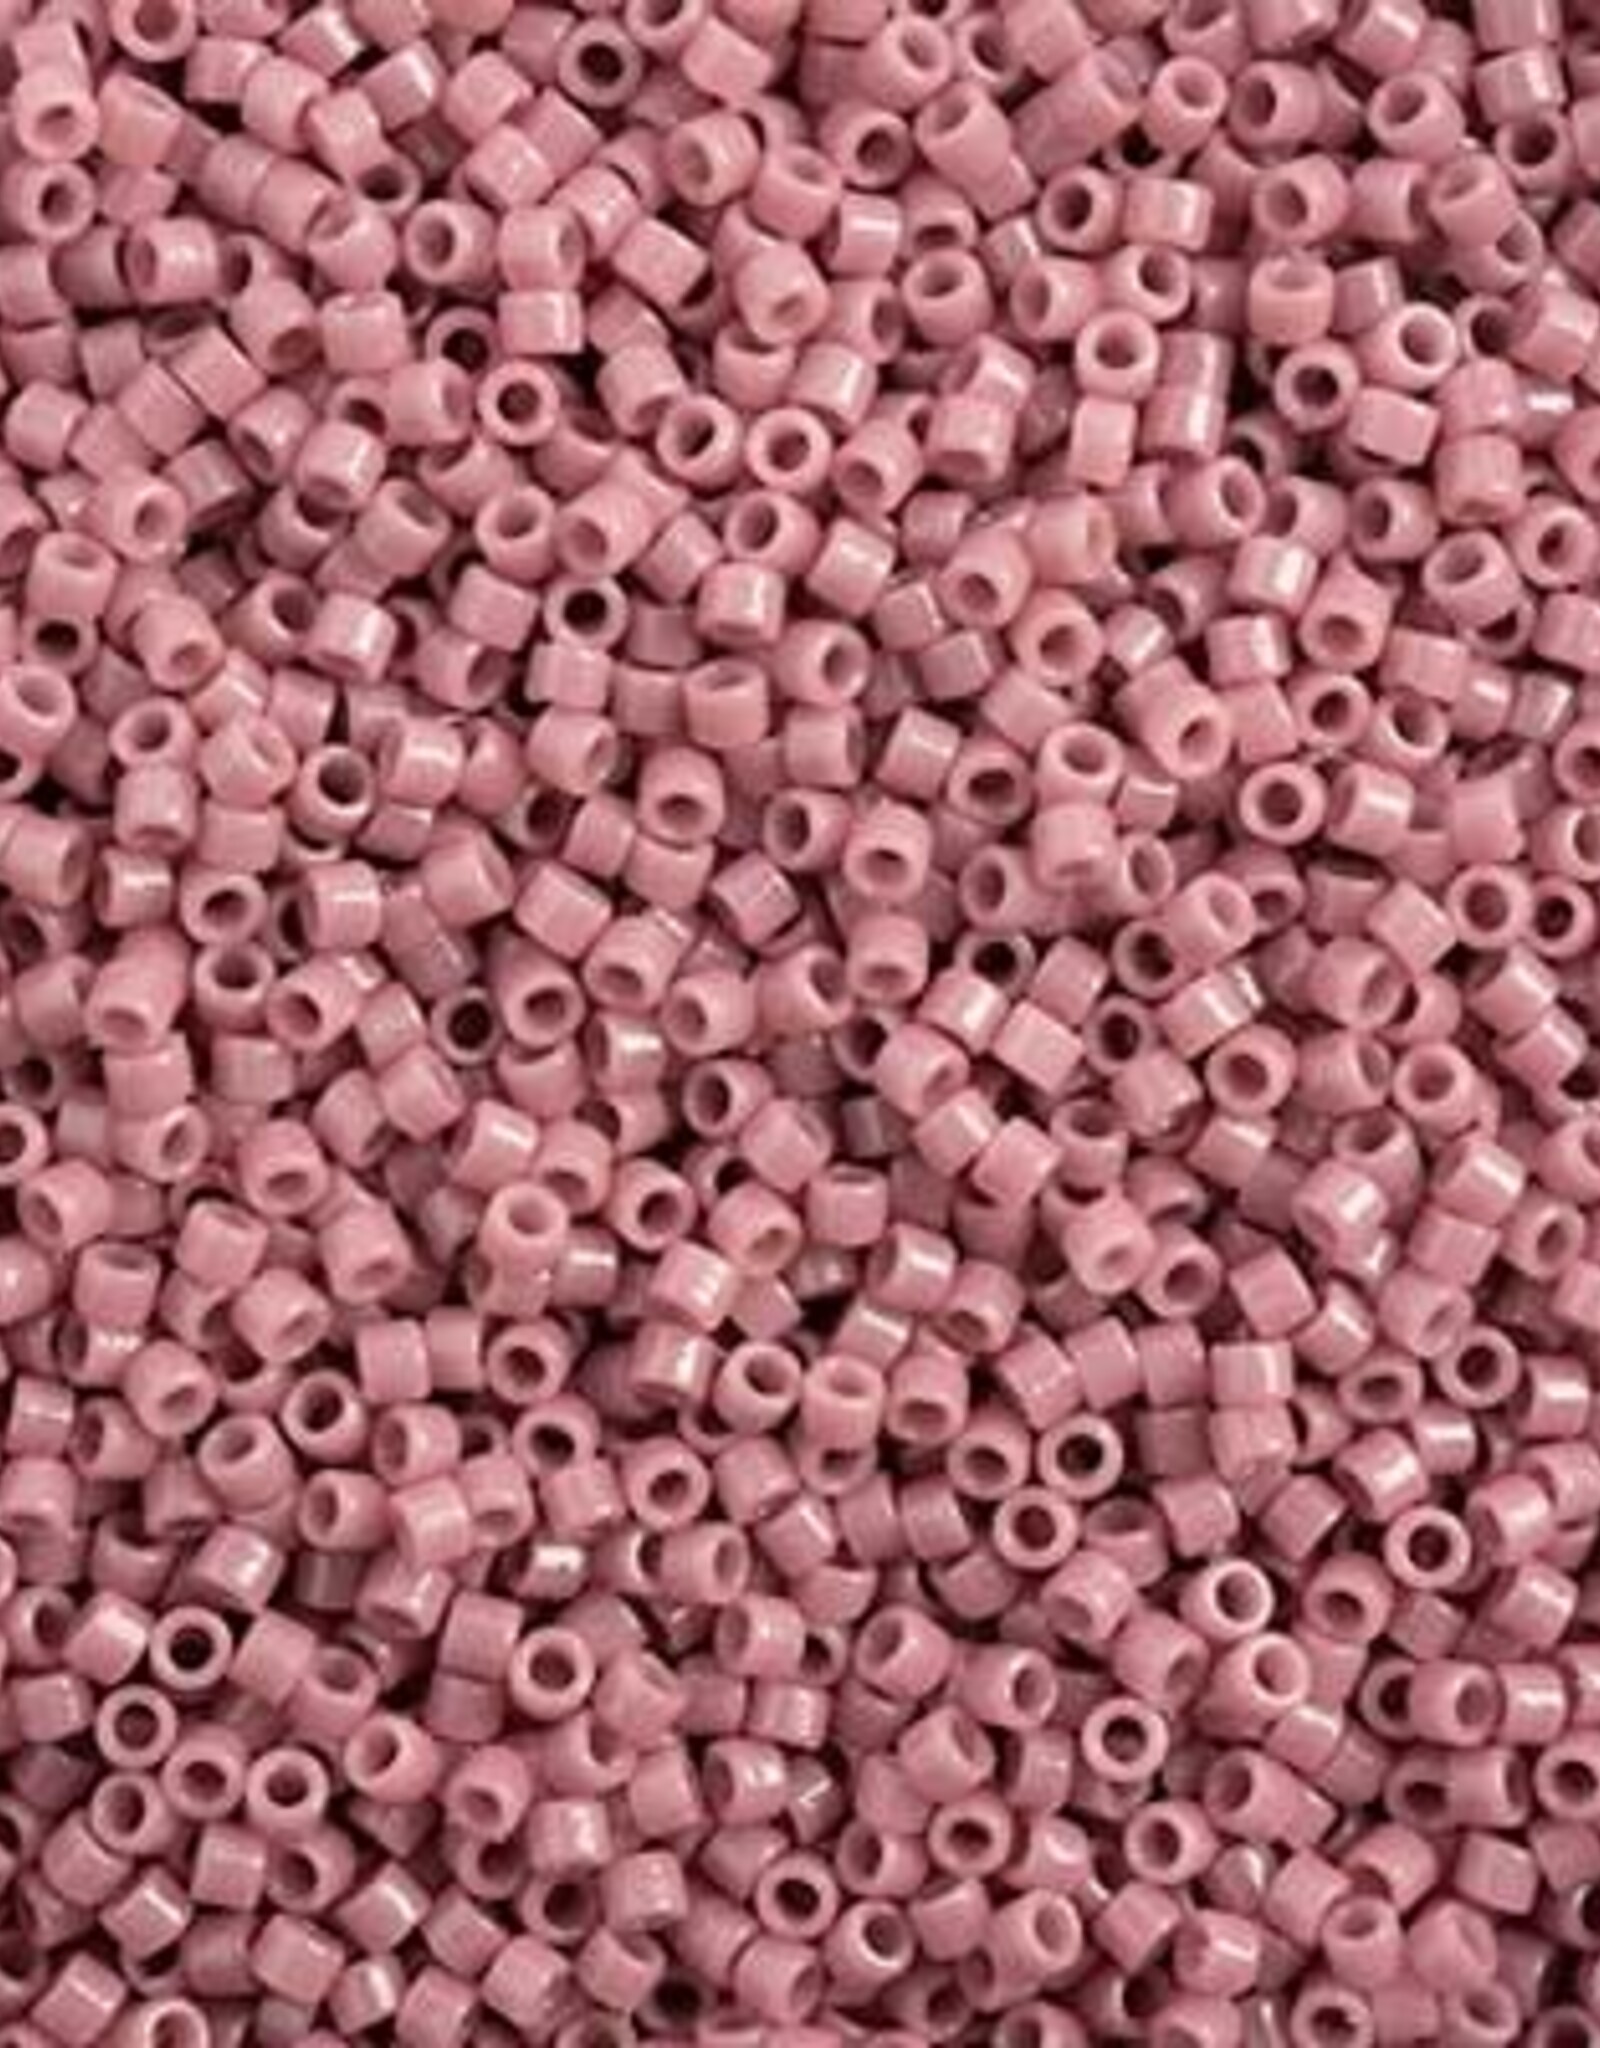 Miyuki Delica Seed Beads Delica 11/0 Duracoat Opaque Dyed Pink Hydrangea 2137v